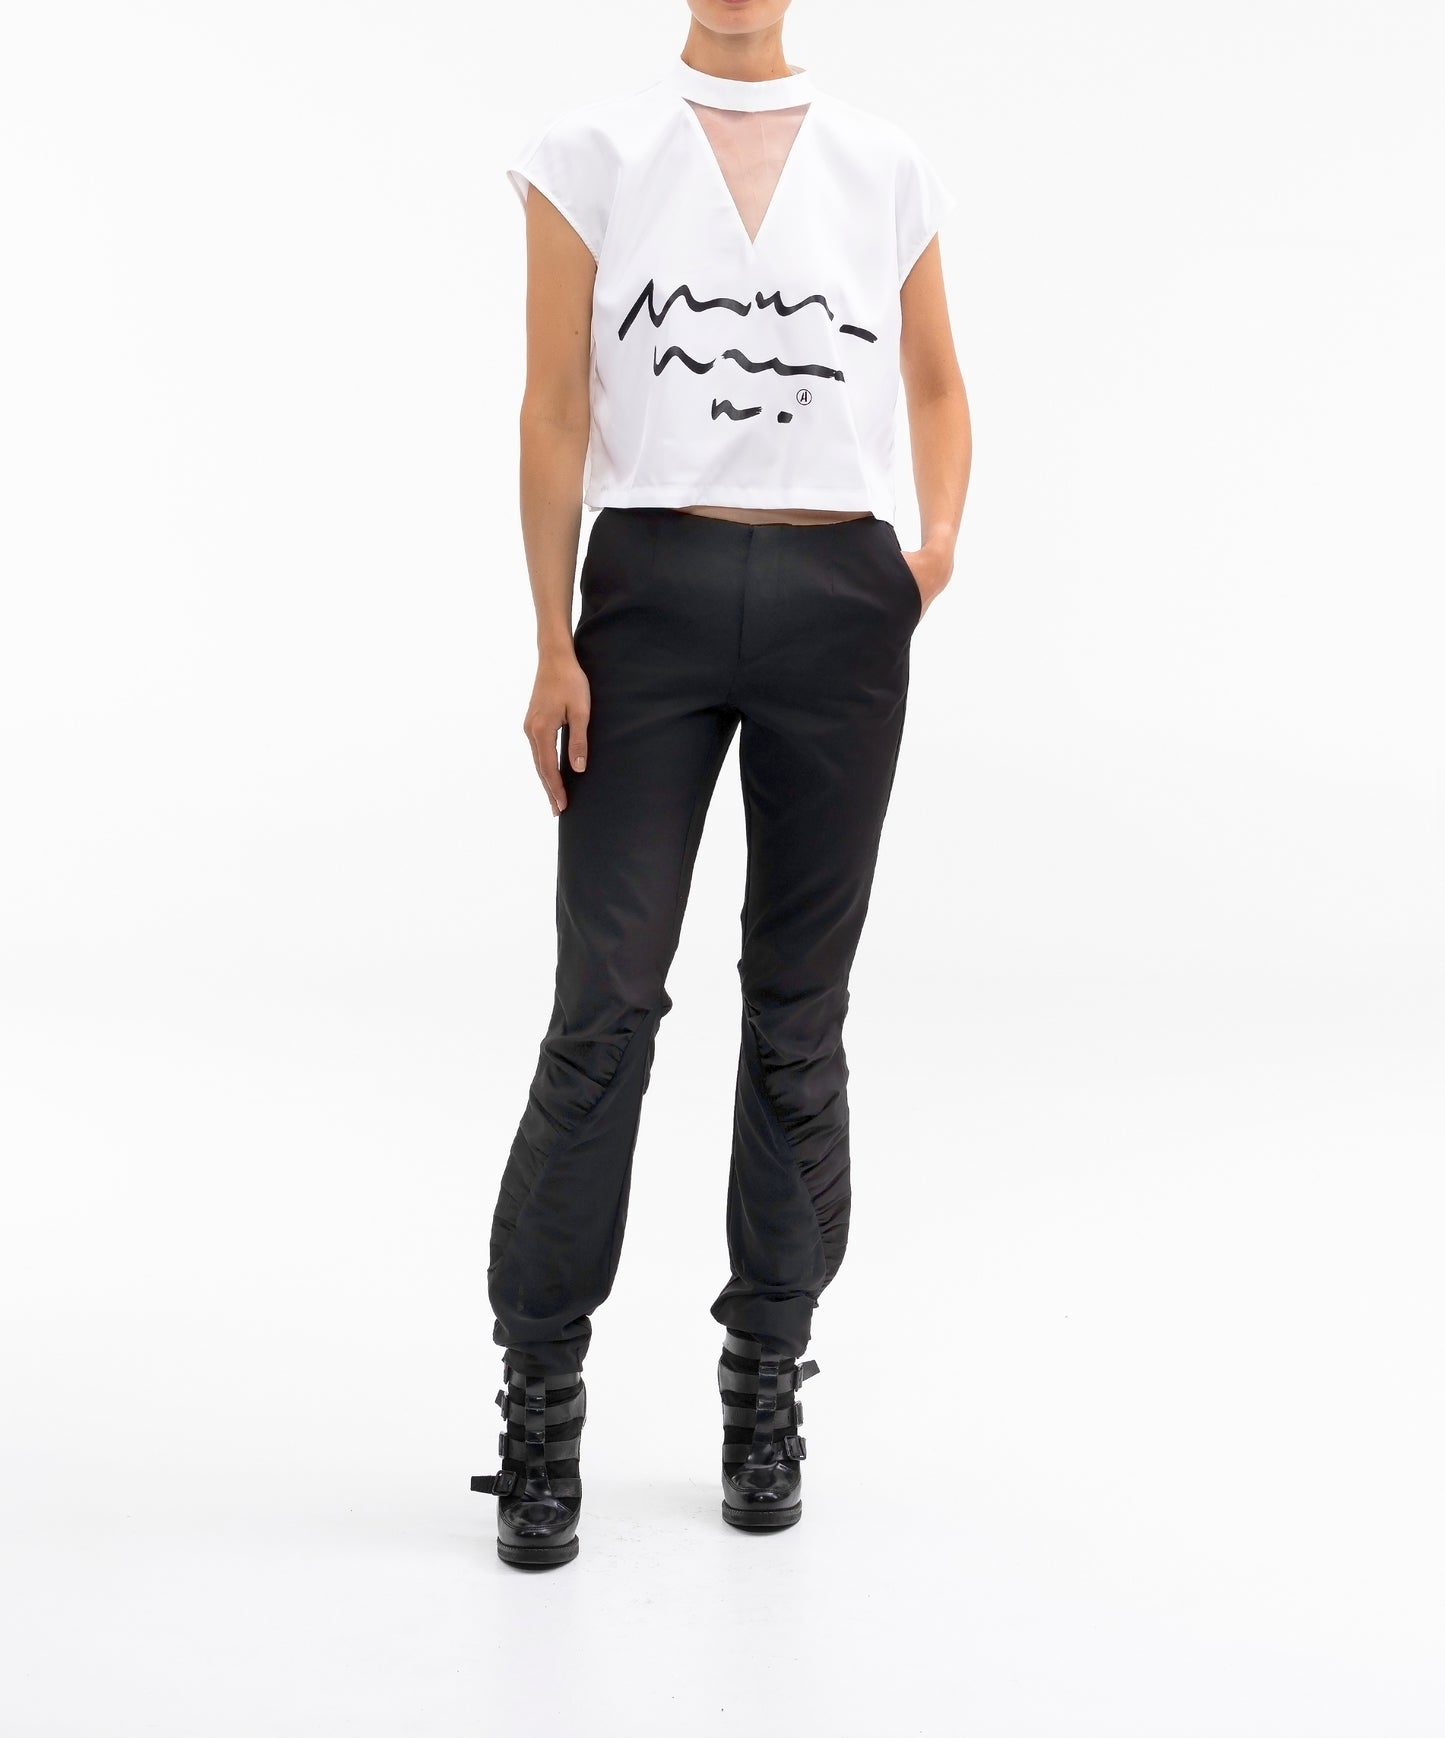 NECK BAND SCRIPT MUSCLE TEE